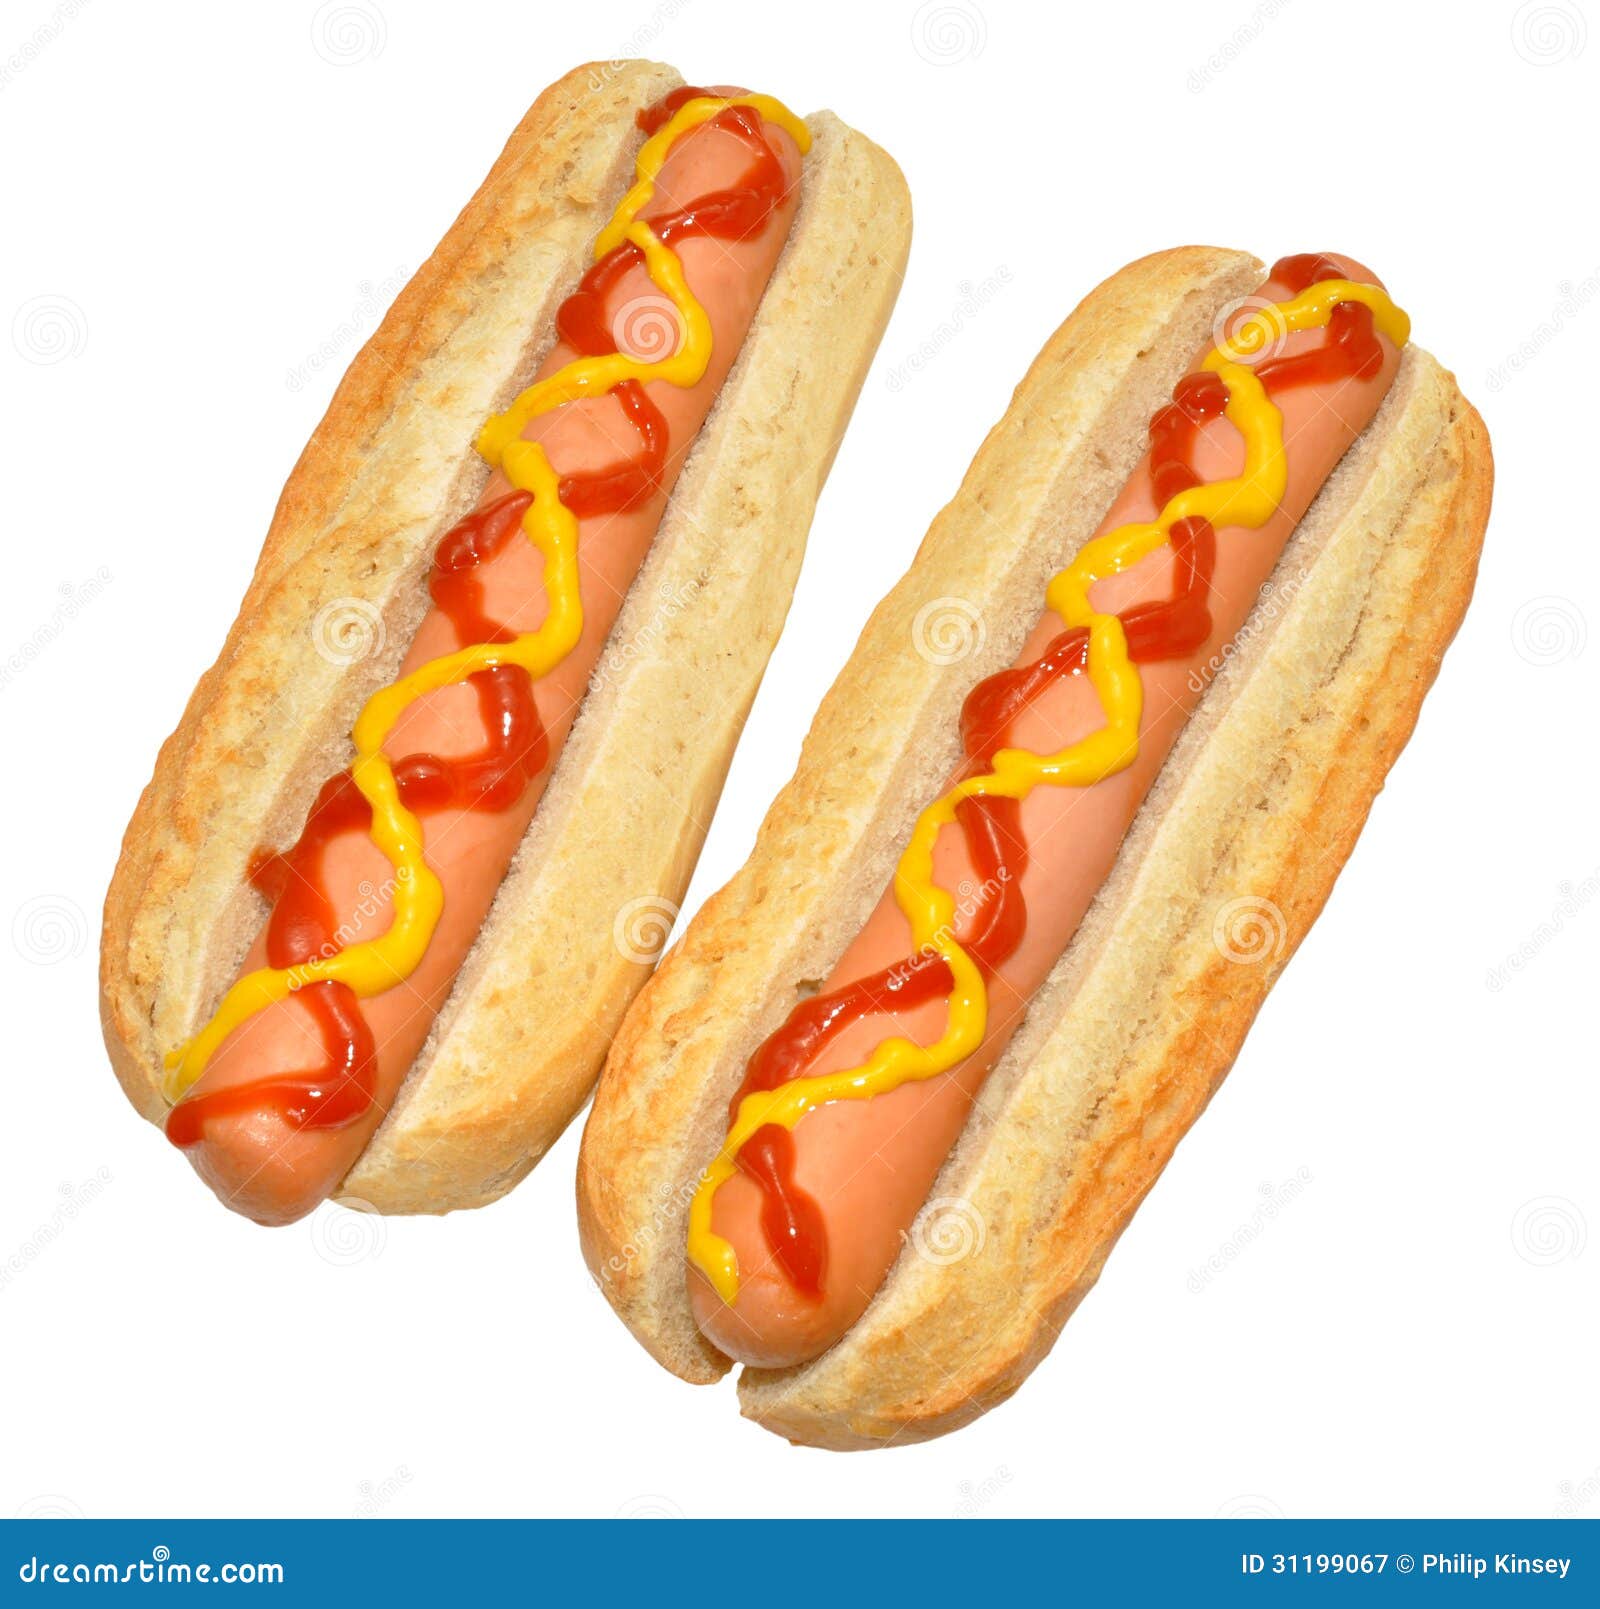 two-hot-dogs-mustard-tomato-sauce-isolated-white-background-31199067.jpg